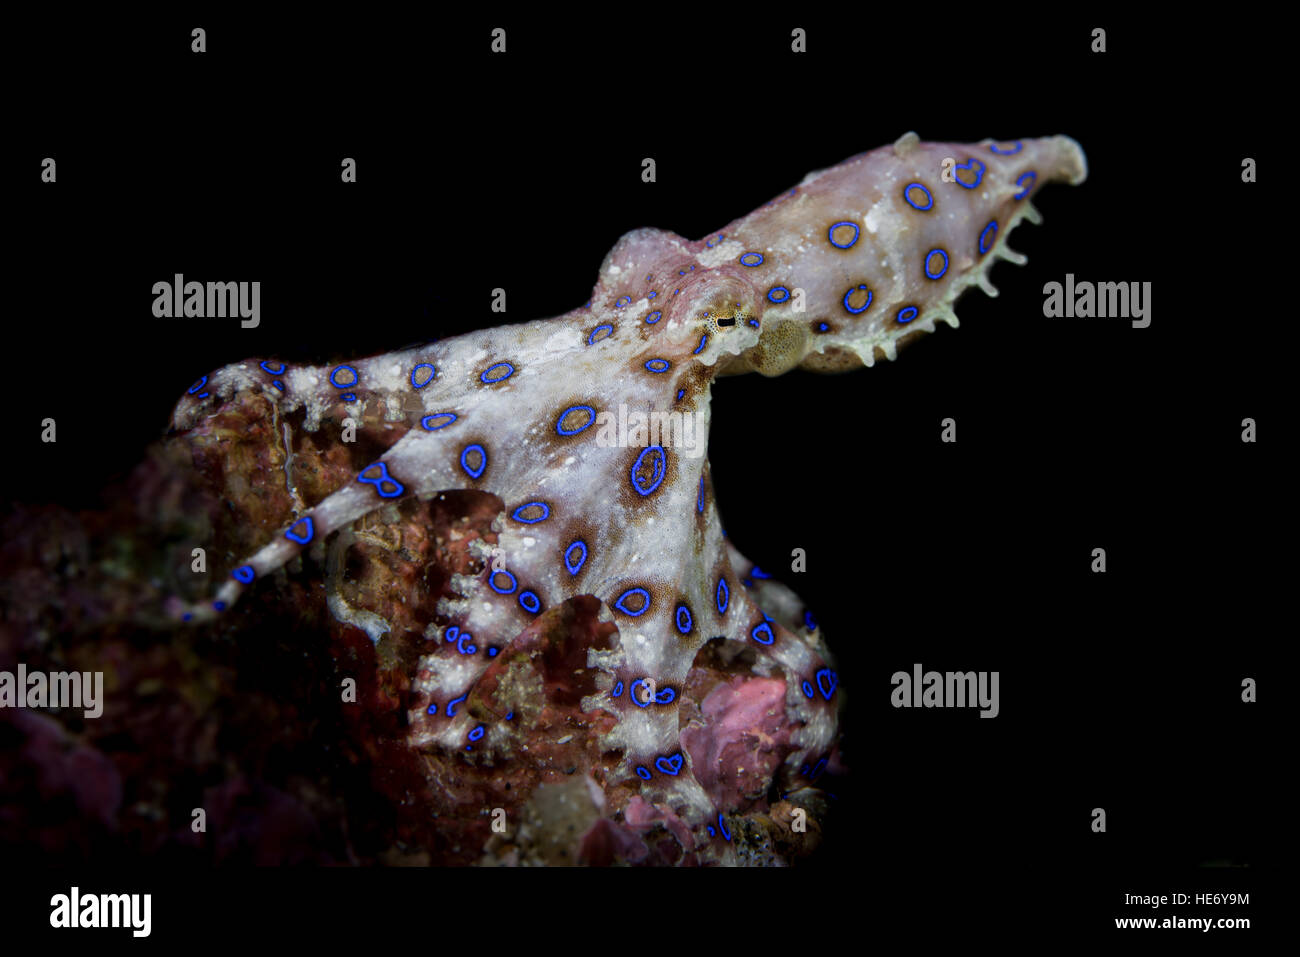 Blue ring or Blue-ringed Octopus (Hapalochlaena sp.) in Lembeh Strait / Indonesia Stock Photo